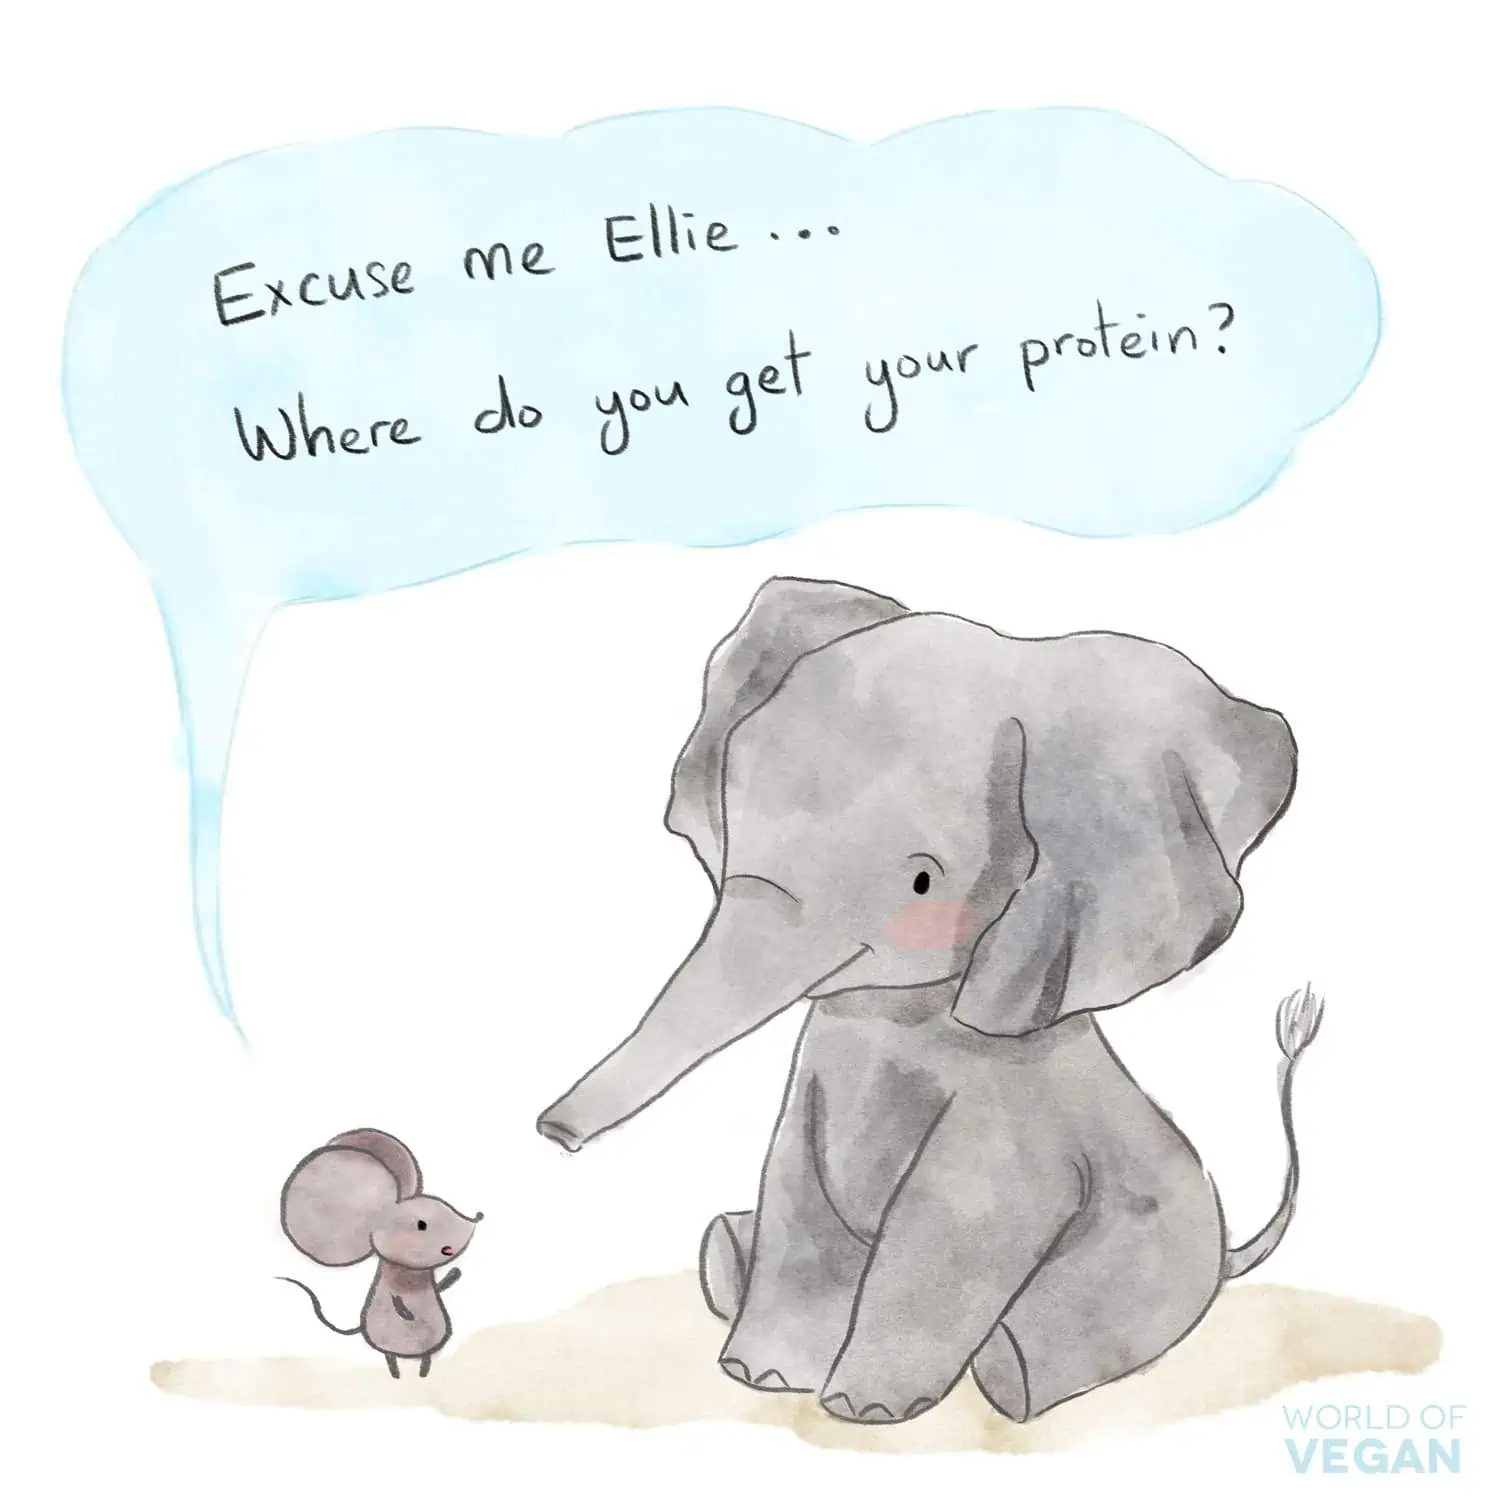 Illustration of a mouse talking to an elephant and asking "Excuse me Ellie...Where do you get your protein?"